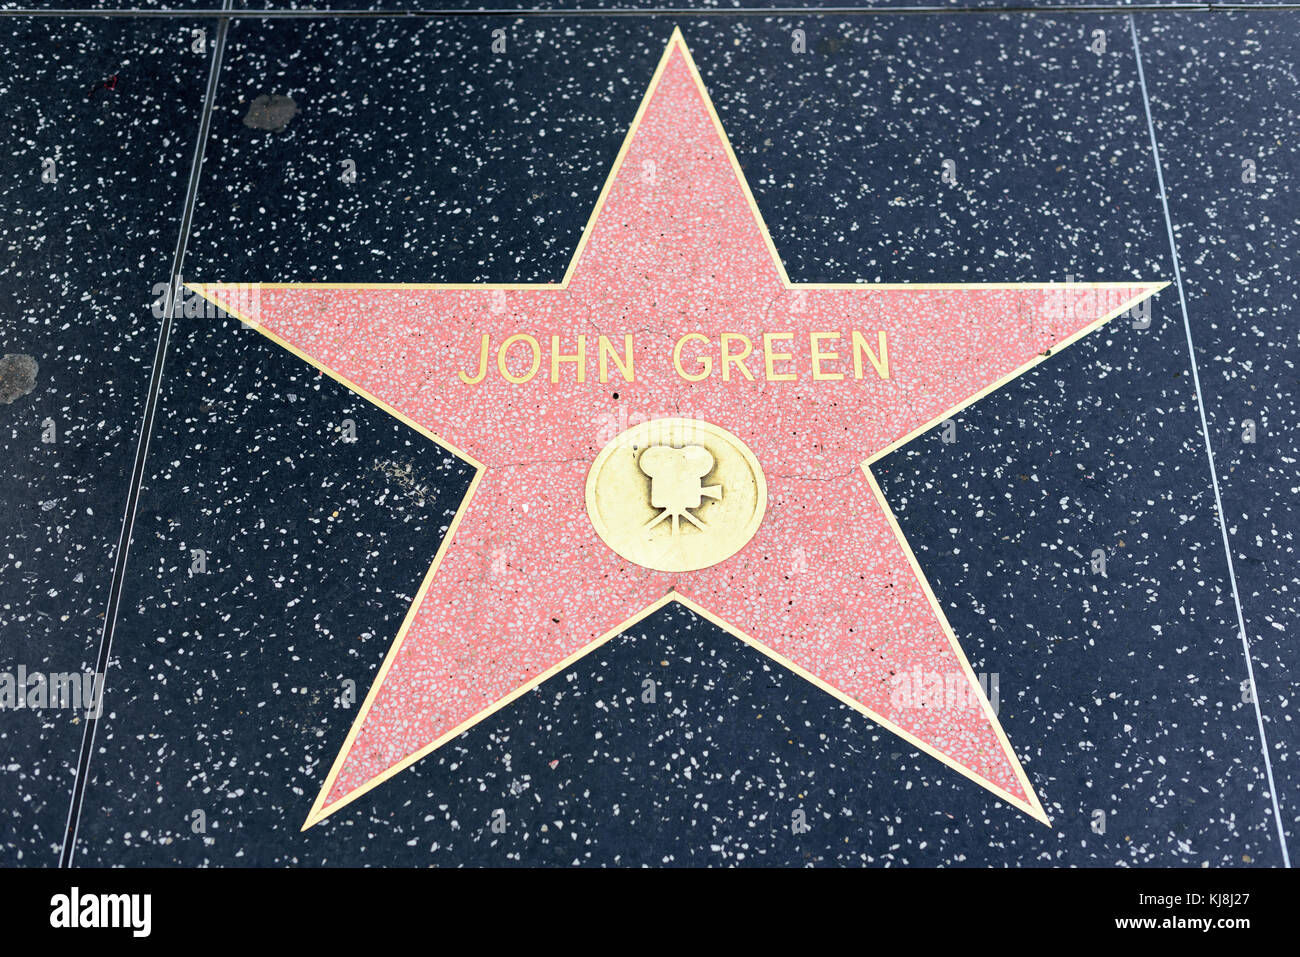 HOLLYWOOD, CA - DECEMBER 06: John Green star on the Hollywood Walk of Fame in Hollywood, California on Dec. 6, 2016. Stock Photo